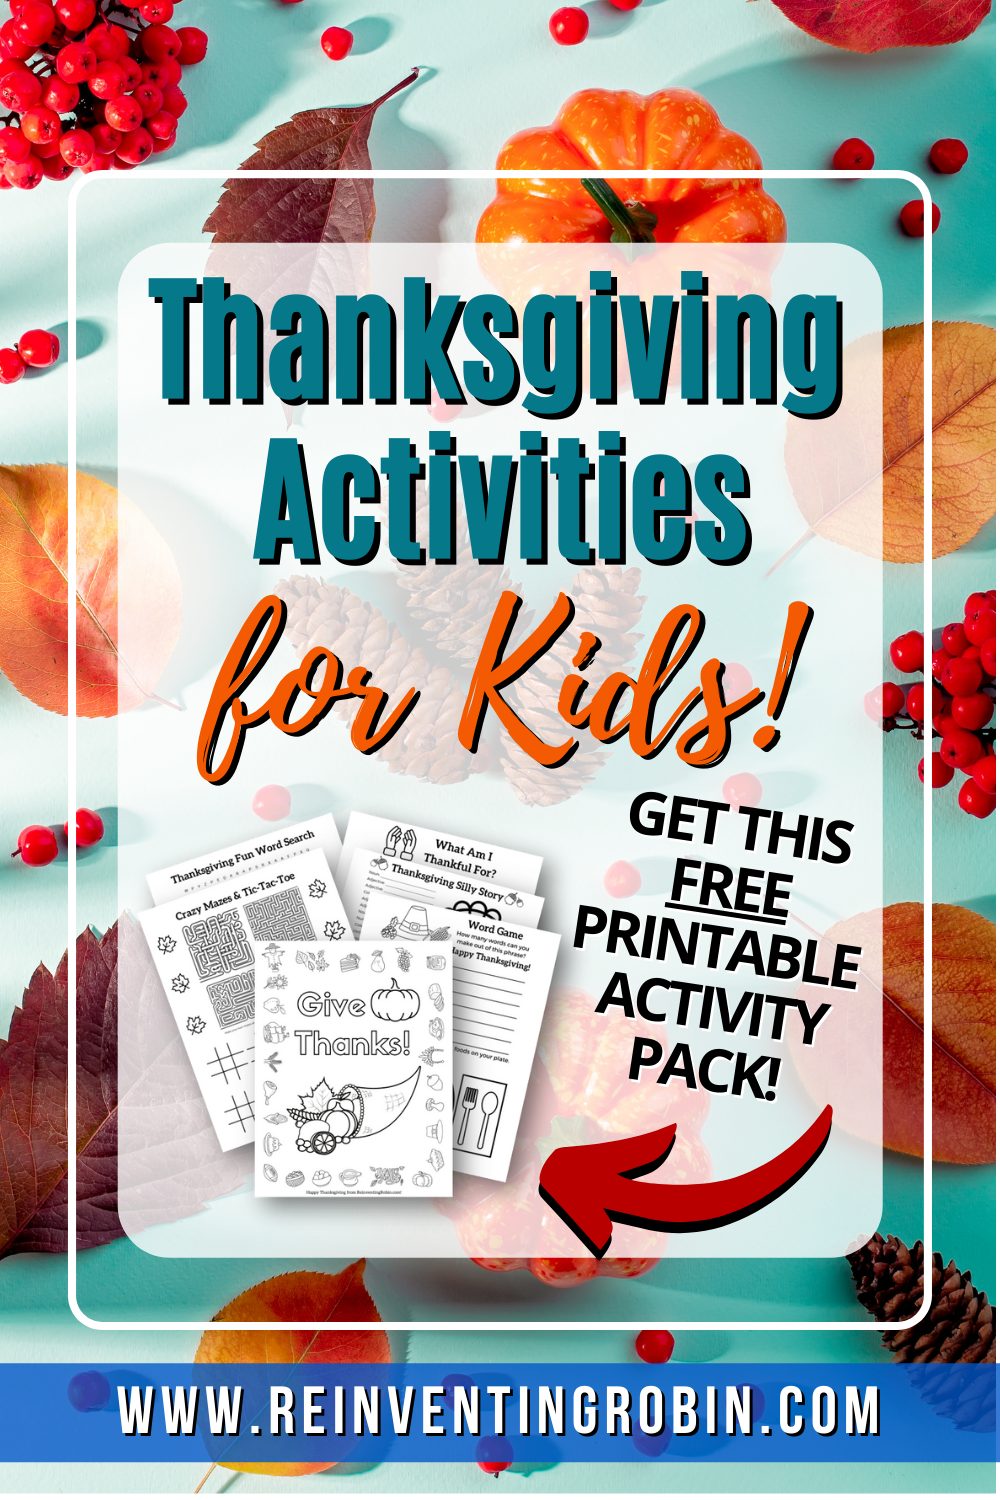 Picture has a fall background with pumpkins, fall leaves, red berries, and pine cones. Title says Thanksgiving Activities for Kids! Get this free printable activity pack! www.reinventingrobin.com